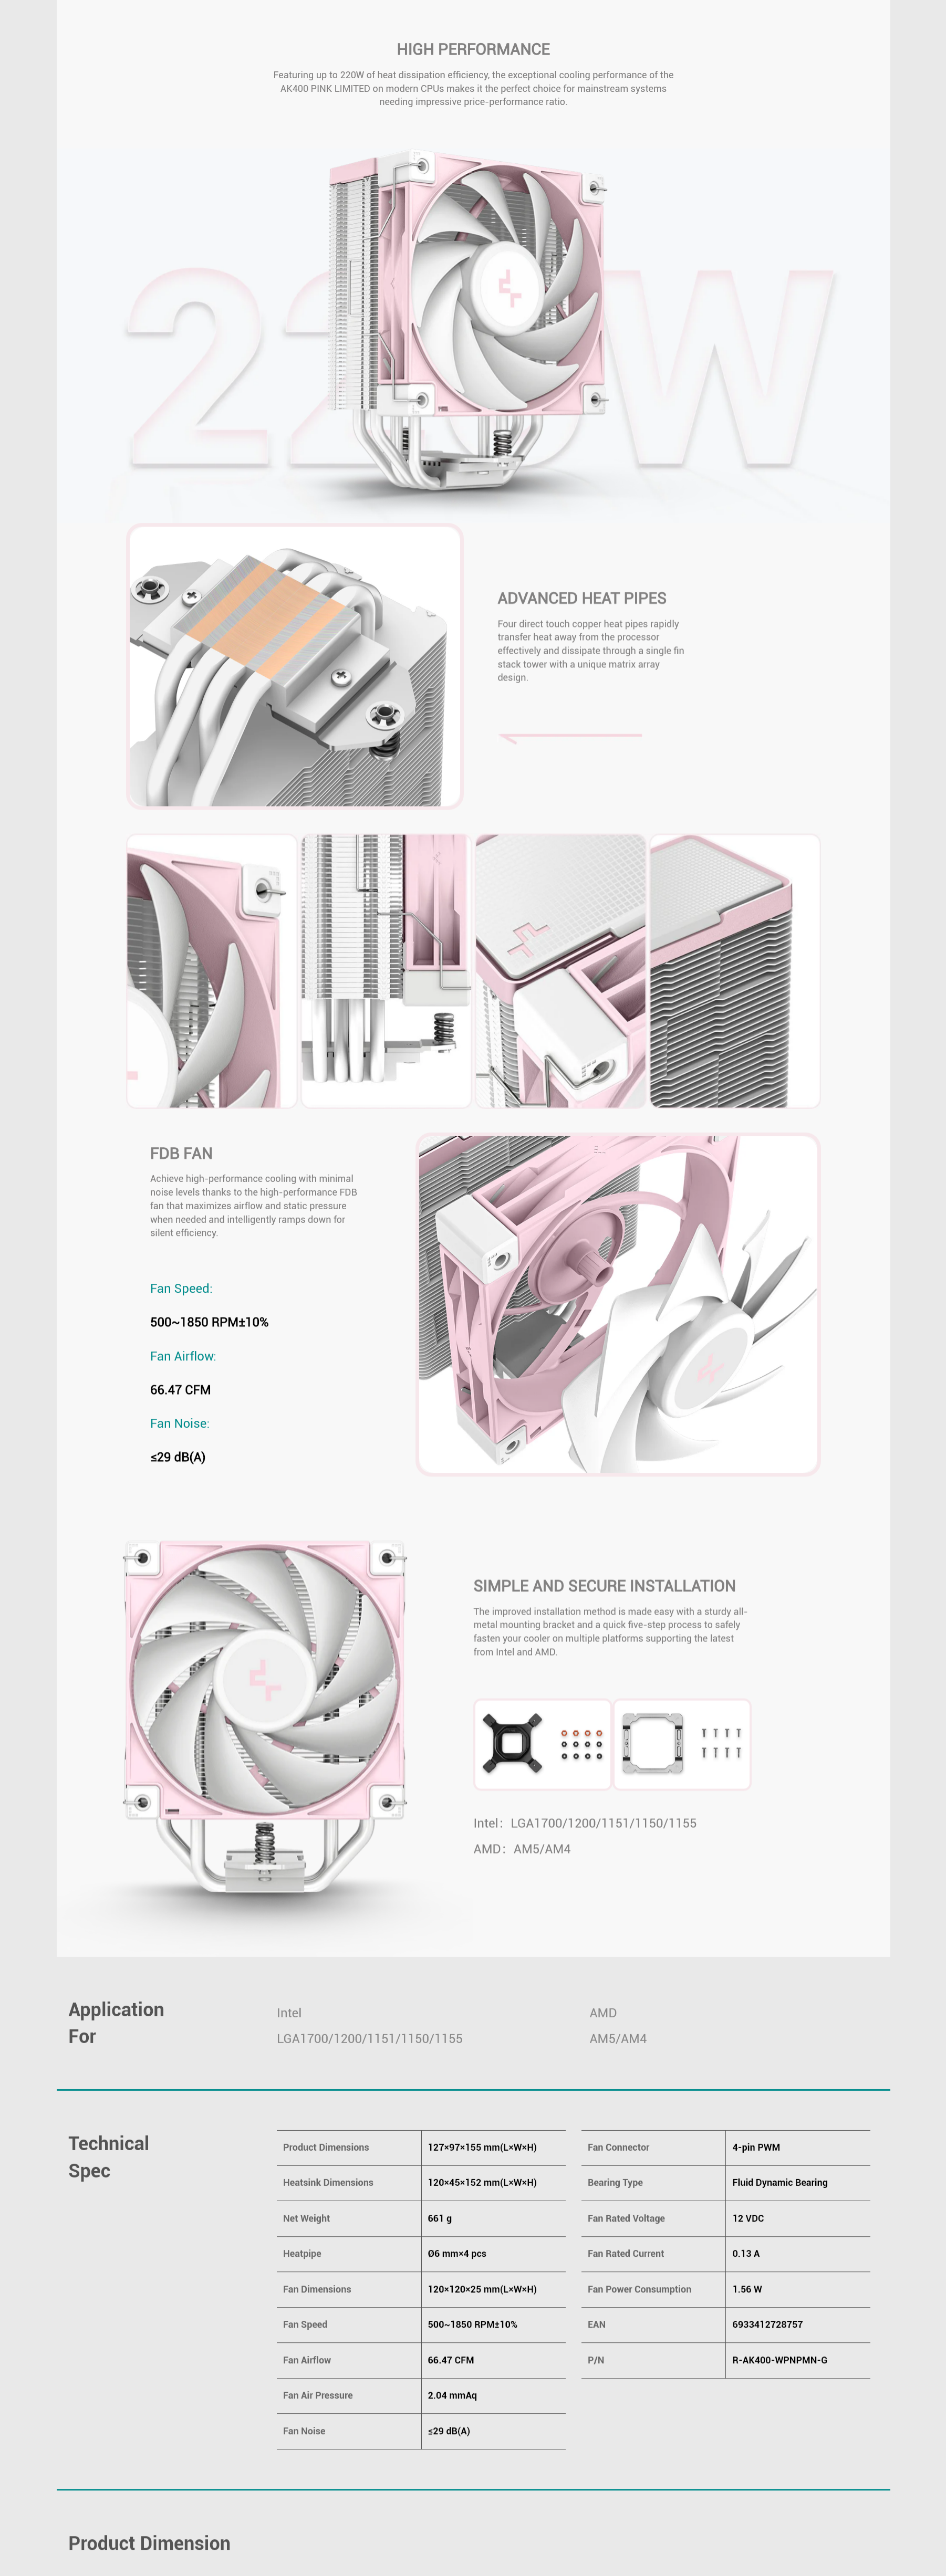 A large marketing image providing additional information about the product DeepCool AK400 CPU Cooler - Pink - Additional alt info not provided